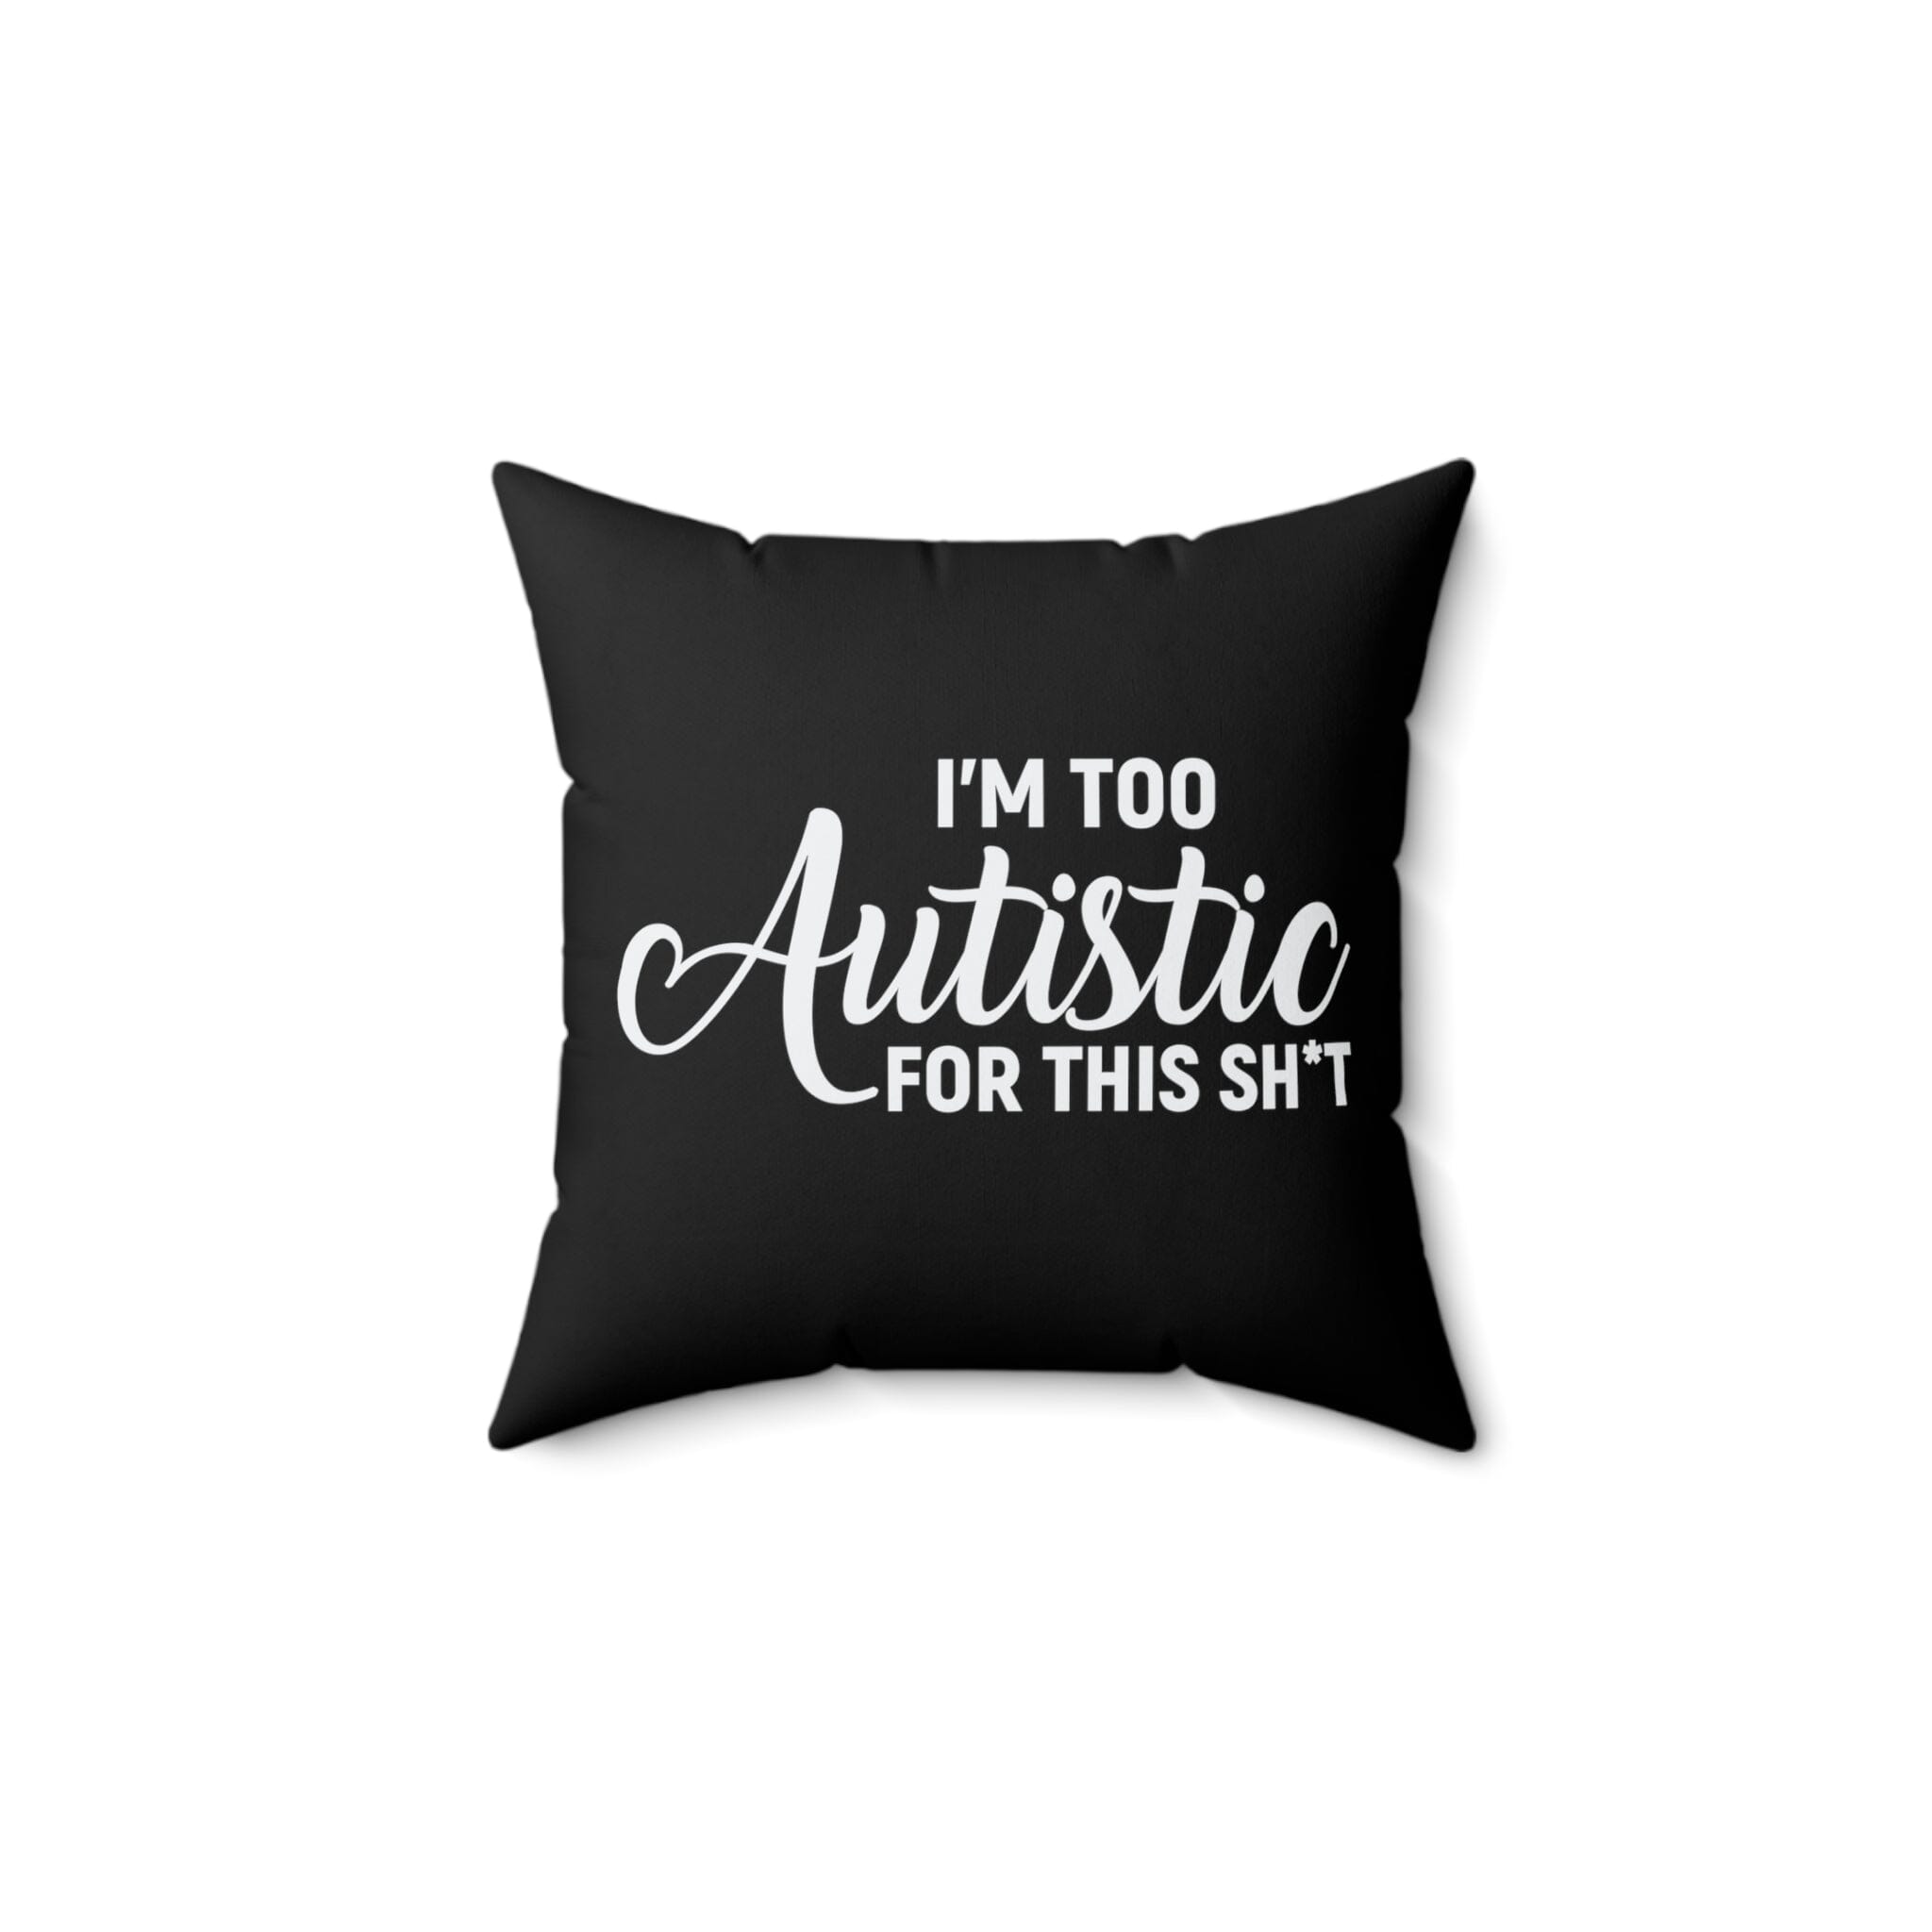 I'm Too Autistic for This Sh*t Pillow Home Decor The Autistic Innovator 14" × 14" 